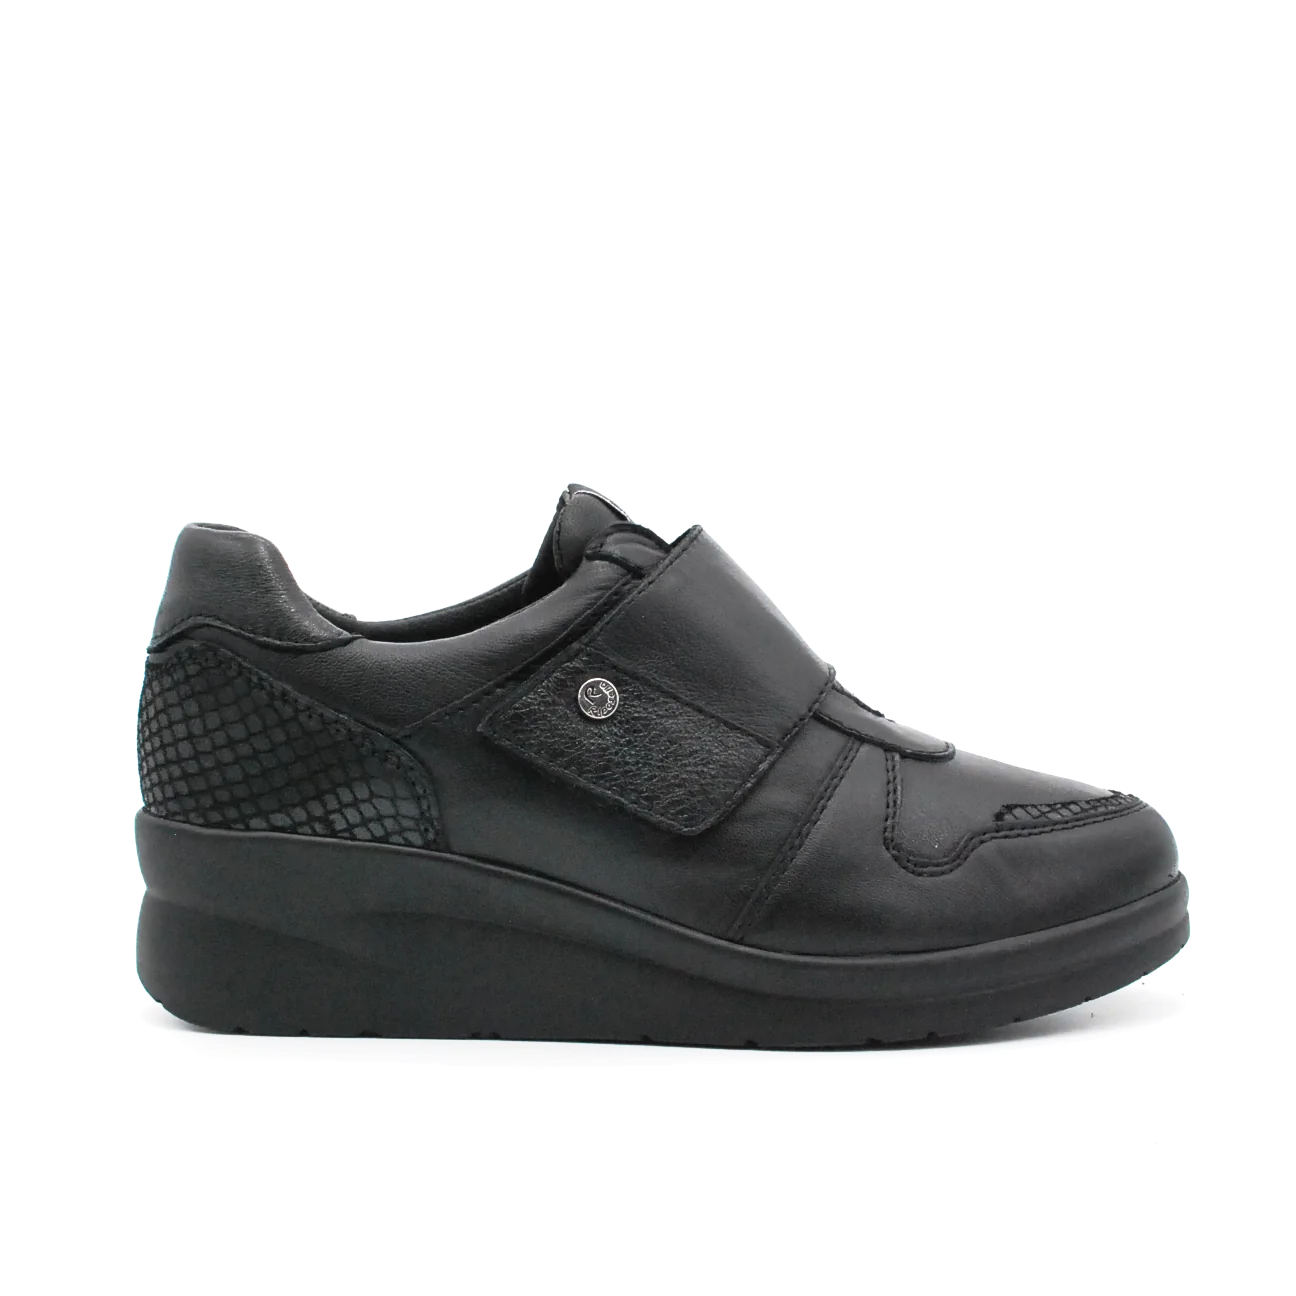 mocassino-riposella-in-pelle-35-nero-pelle-comfort_a3446590-a108-4c1d-9ac5-afae9973a487.png